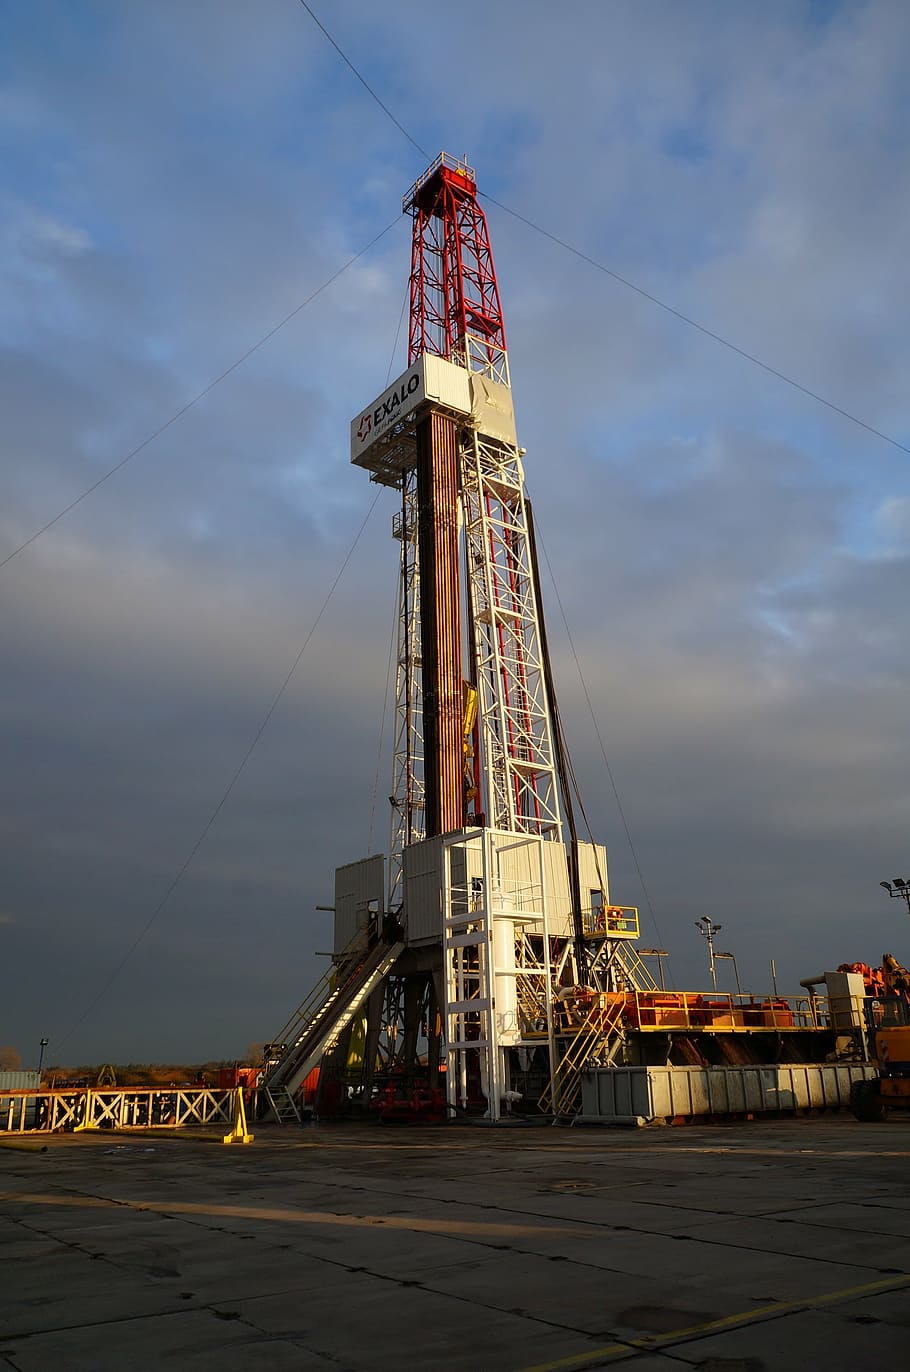 search, drilling rig, industry, petroleum, gasoline, oil Rig, oil Industry, construction Industry, business, factory